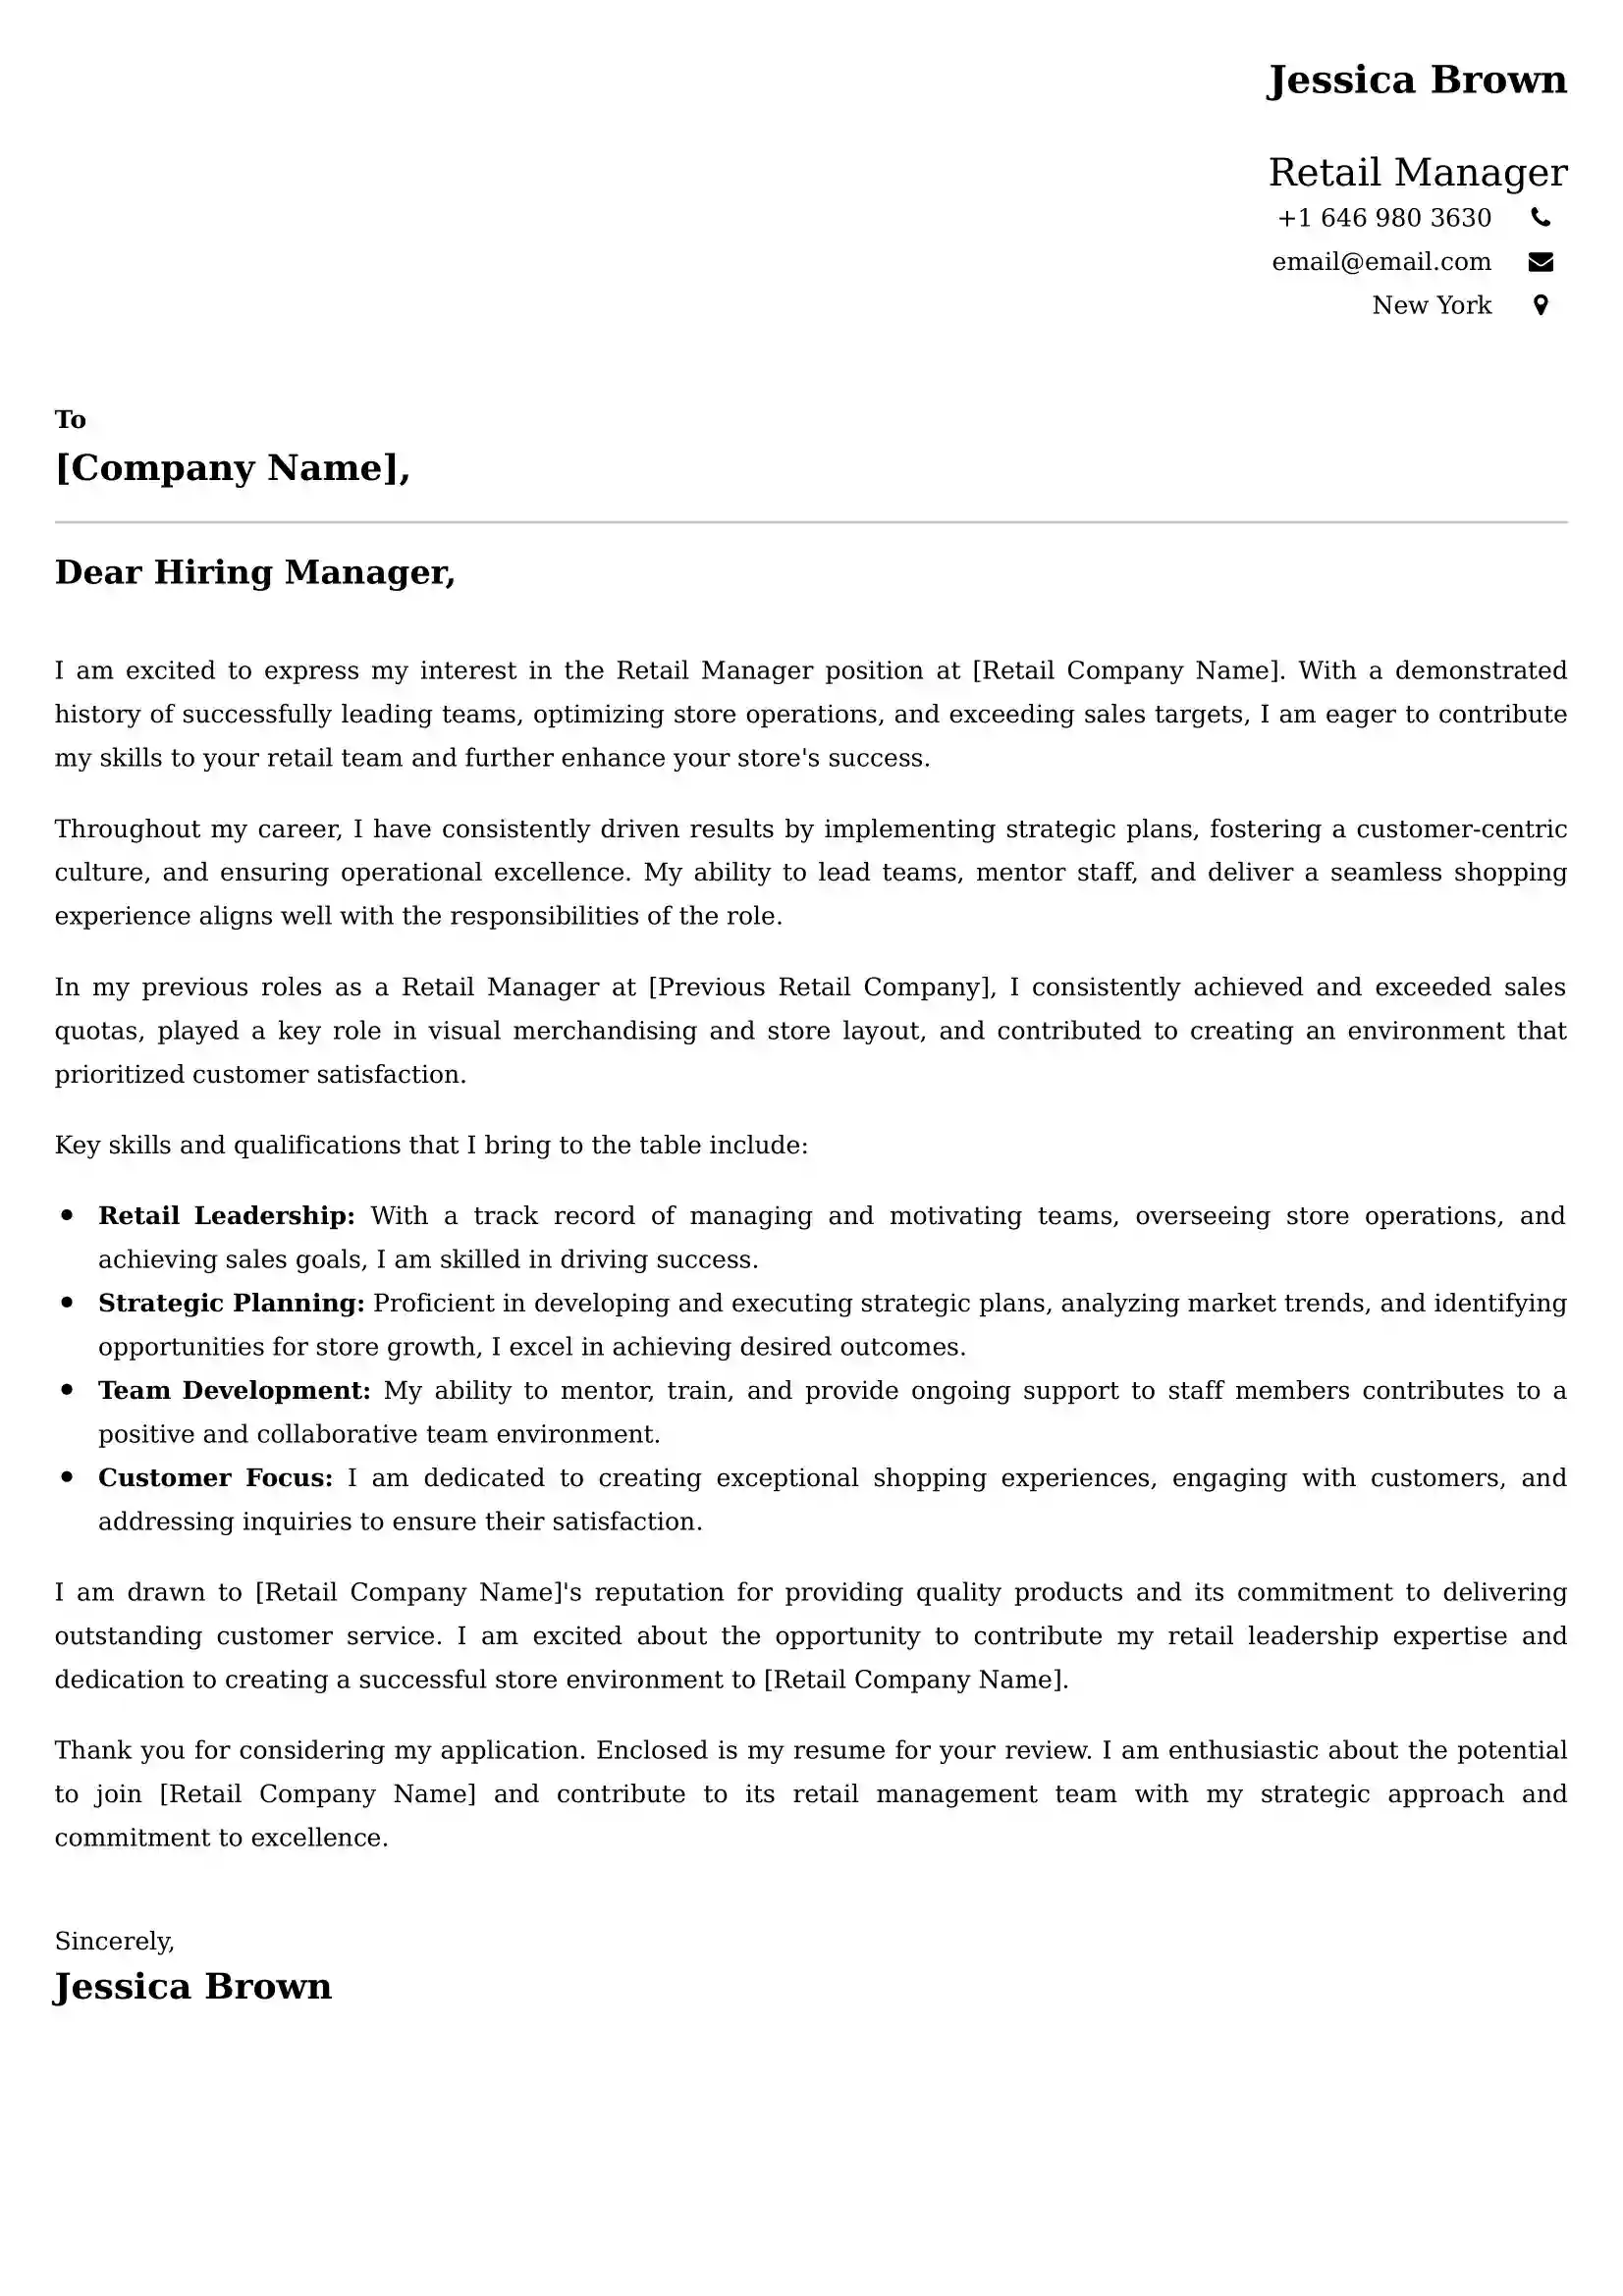 Retail Manager Cover Letter Examples - Latest UK Format